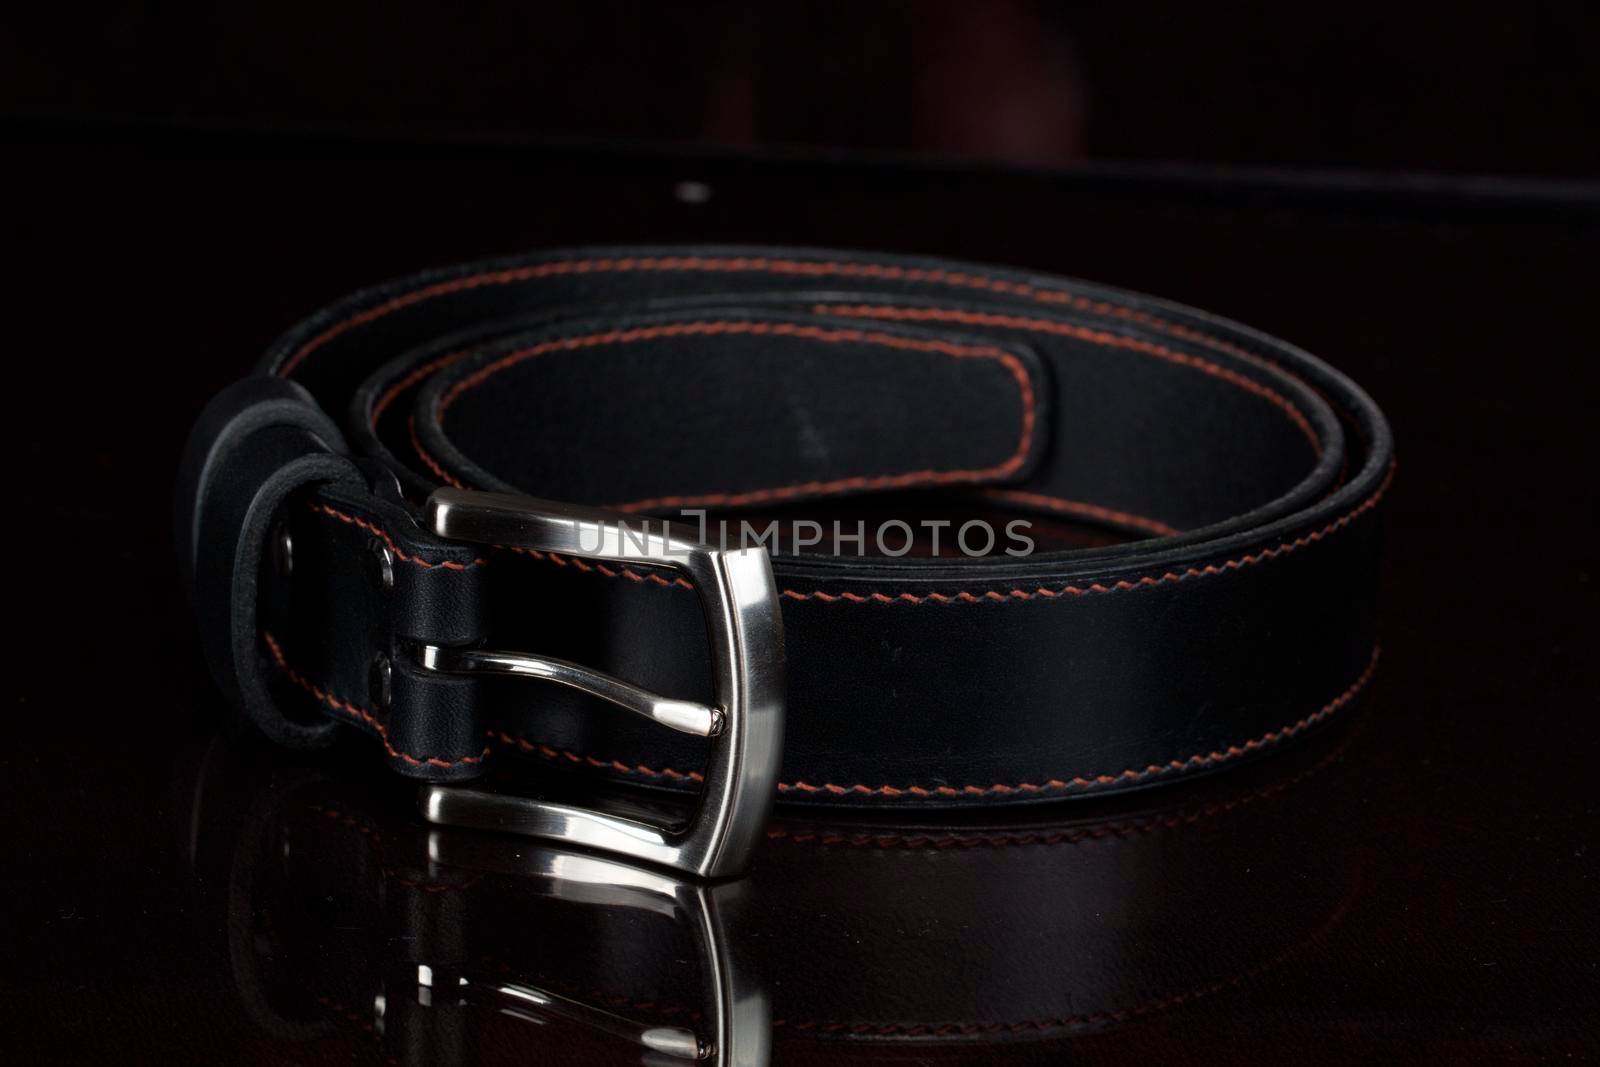 Black leather belt with a metal buckle on a dark background close-up.